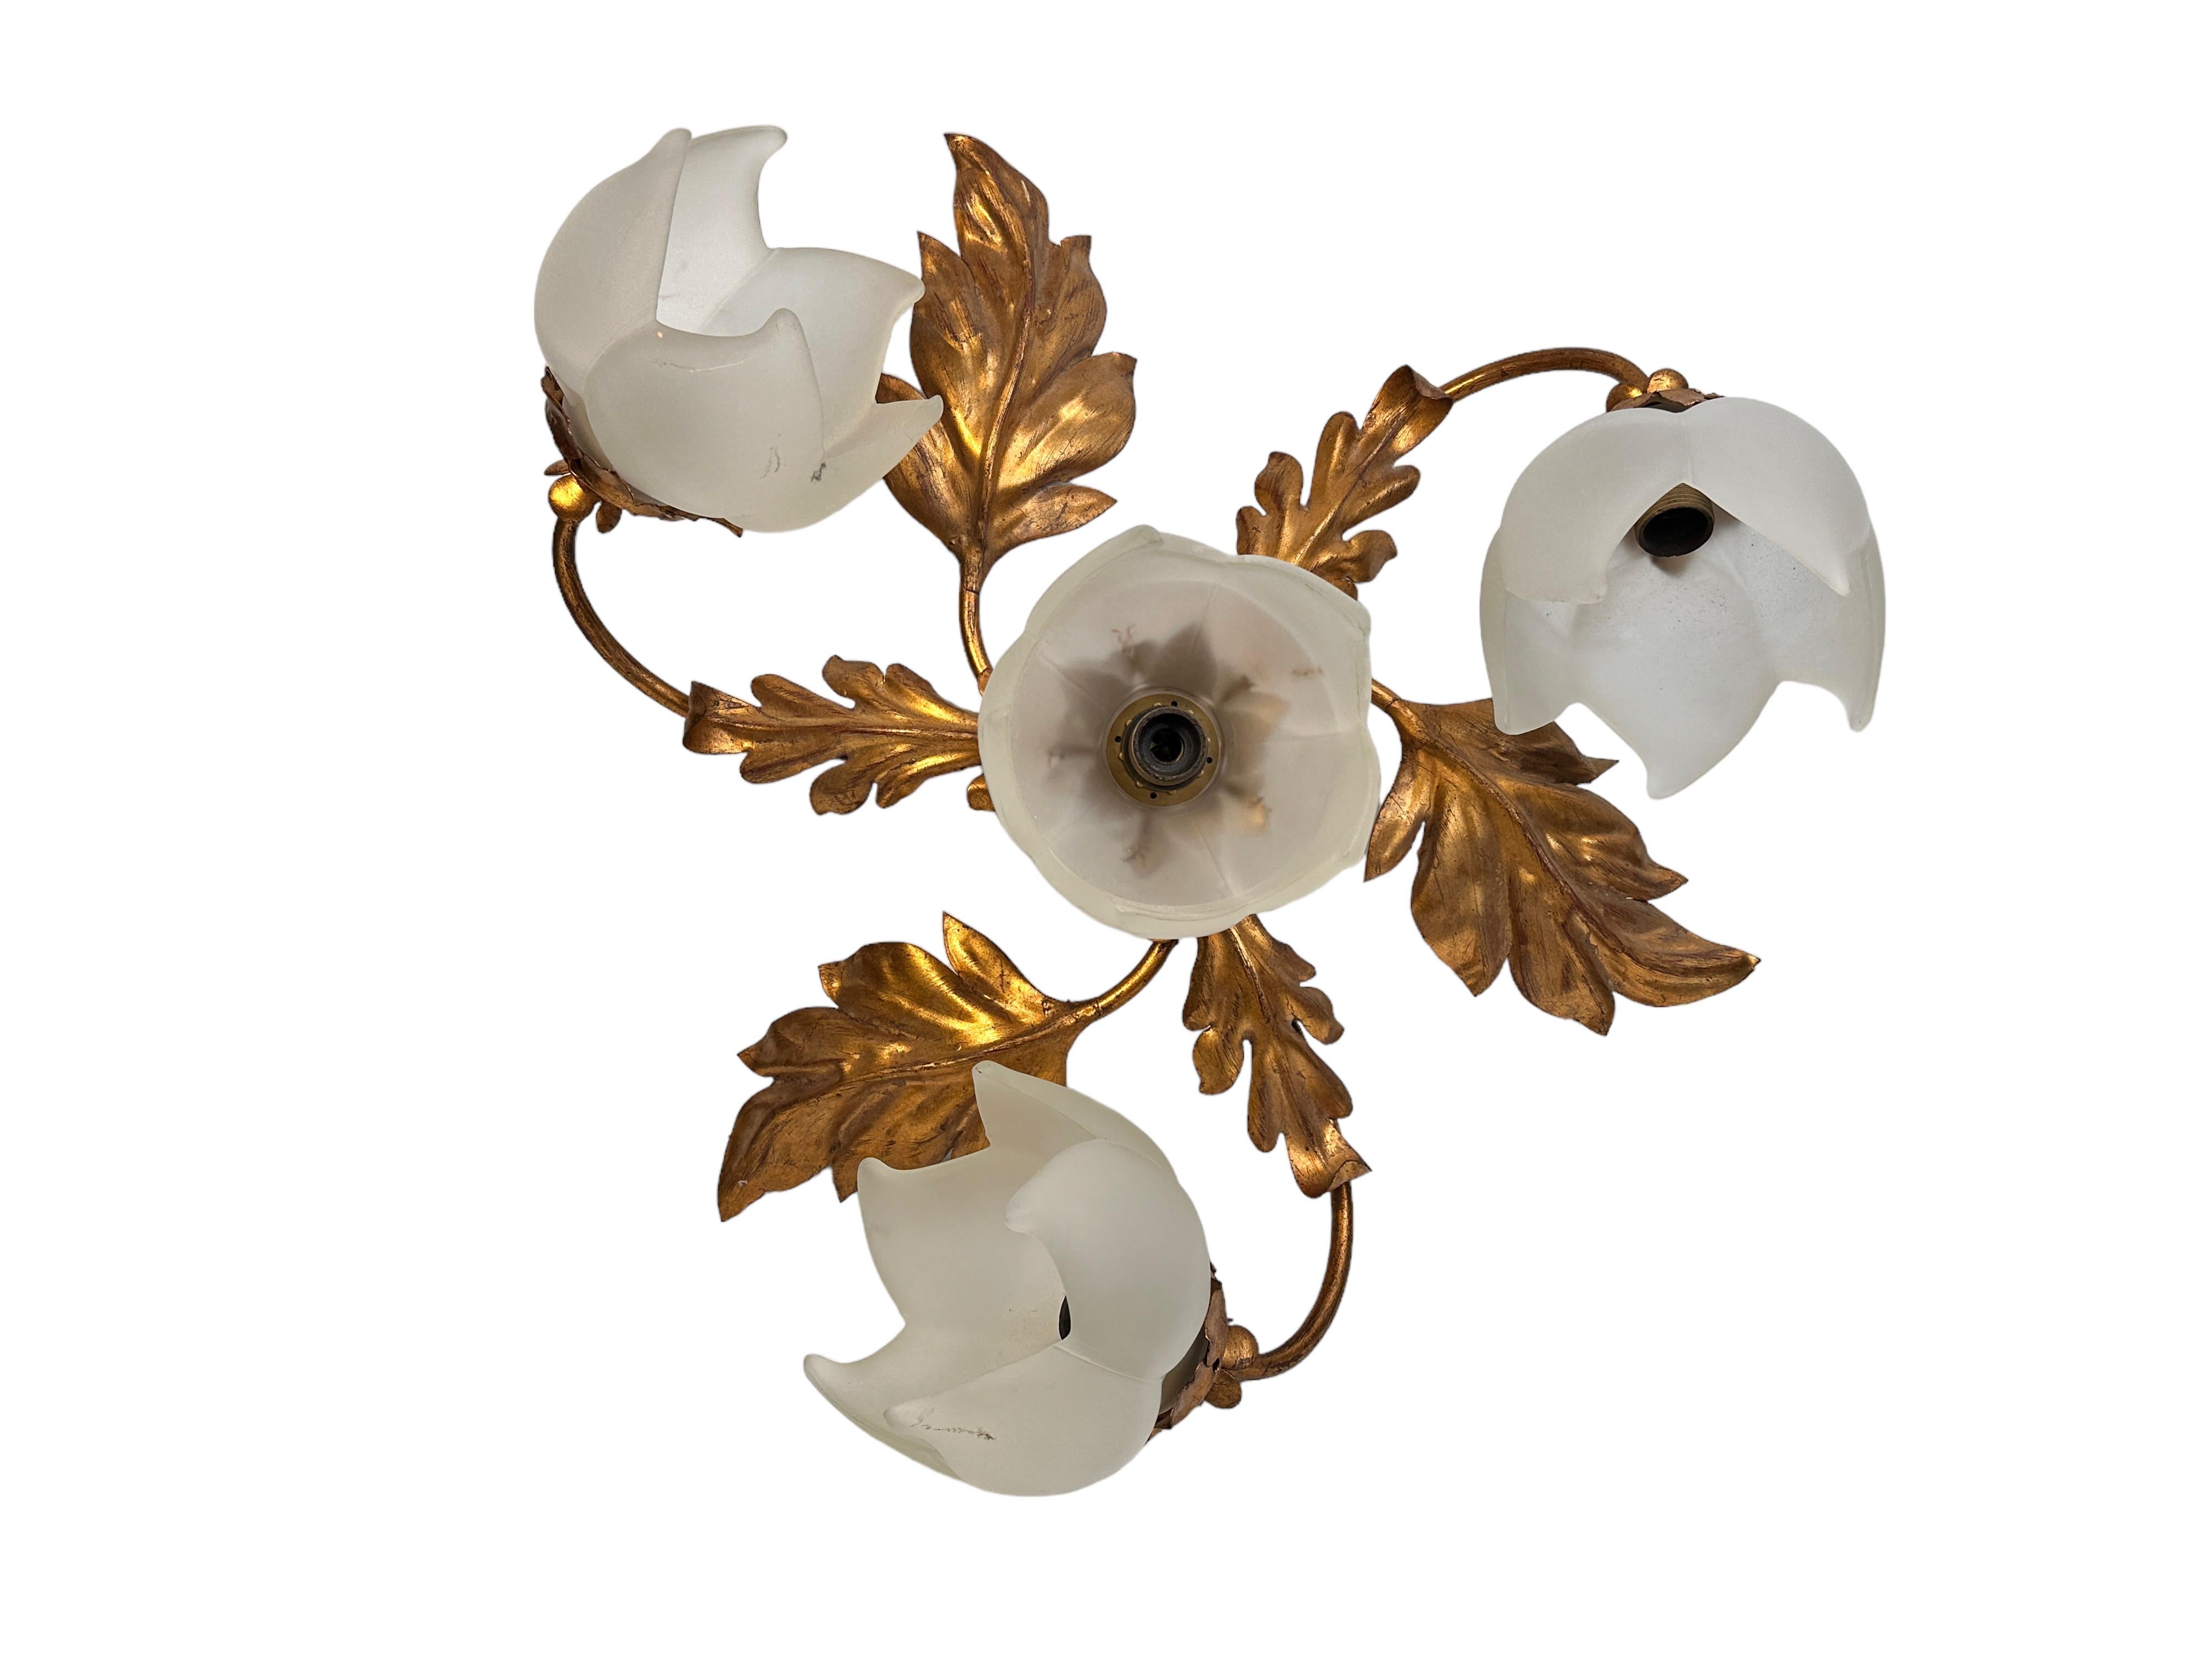 Add a touch of opulence to your home with this charming flushmount. Perfect gilt metal leafs with handmade glass flower style shades to enhance any chic or eclectic home. We'd love to see it hanging in an entryway as a charming welcome home. Built